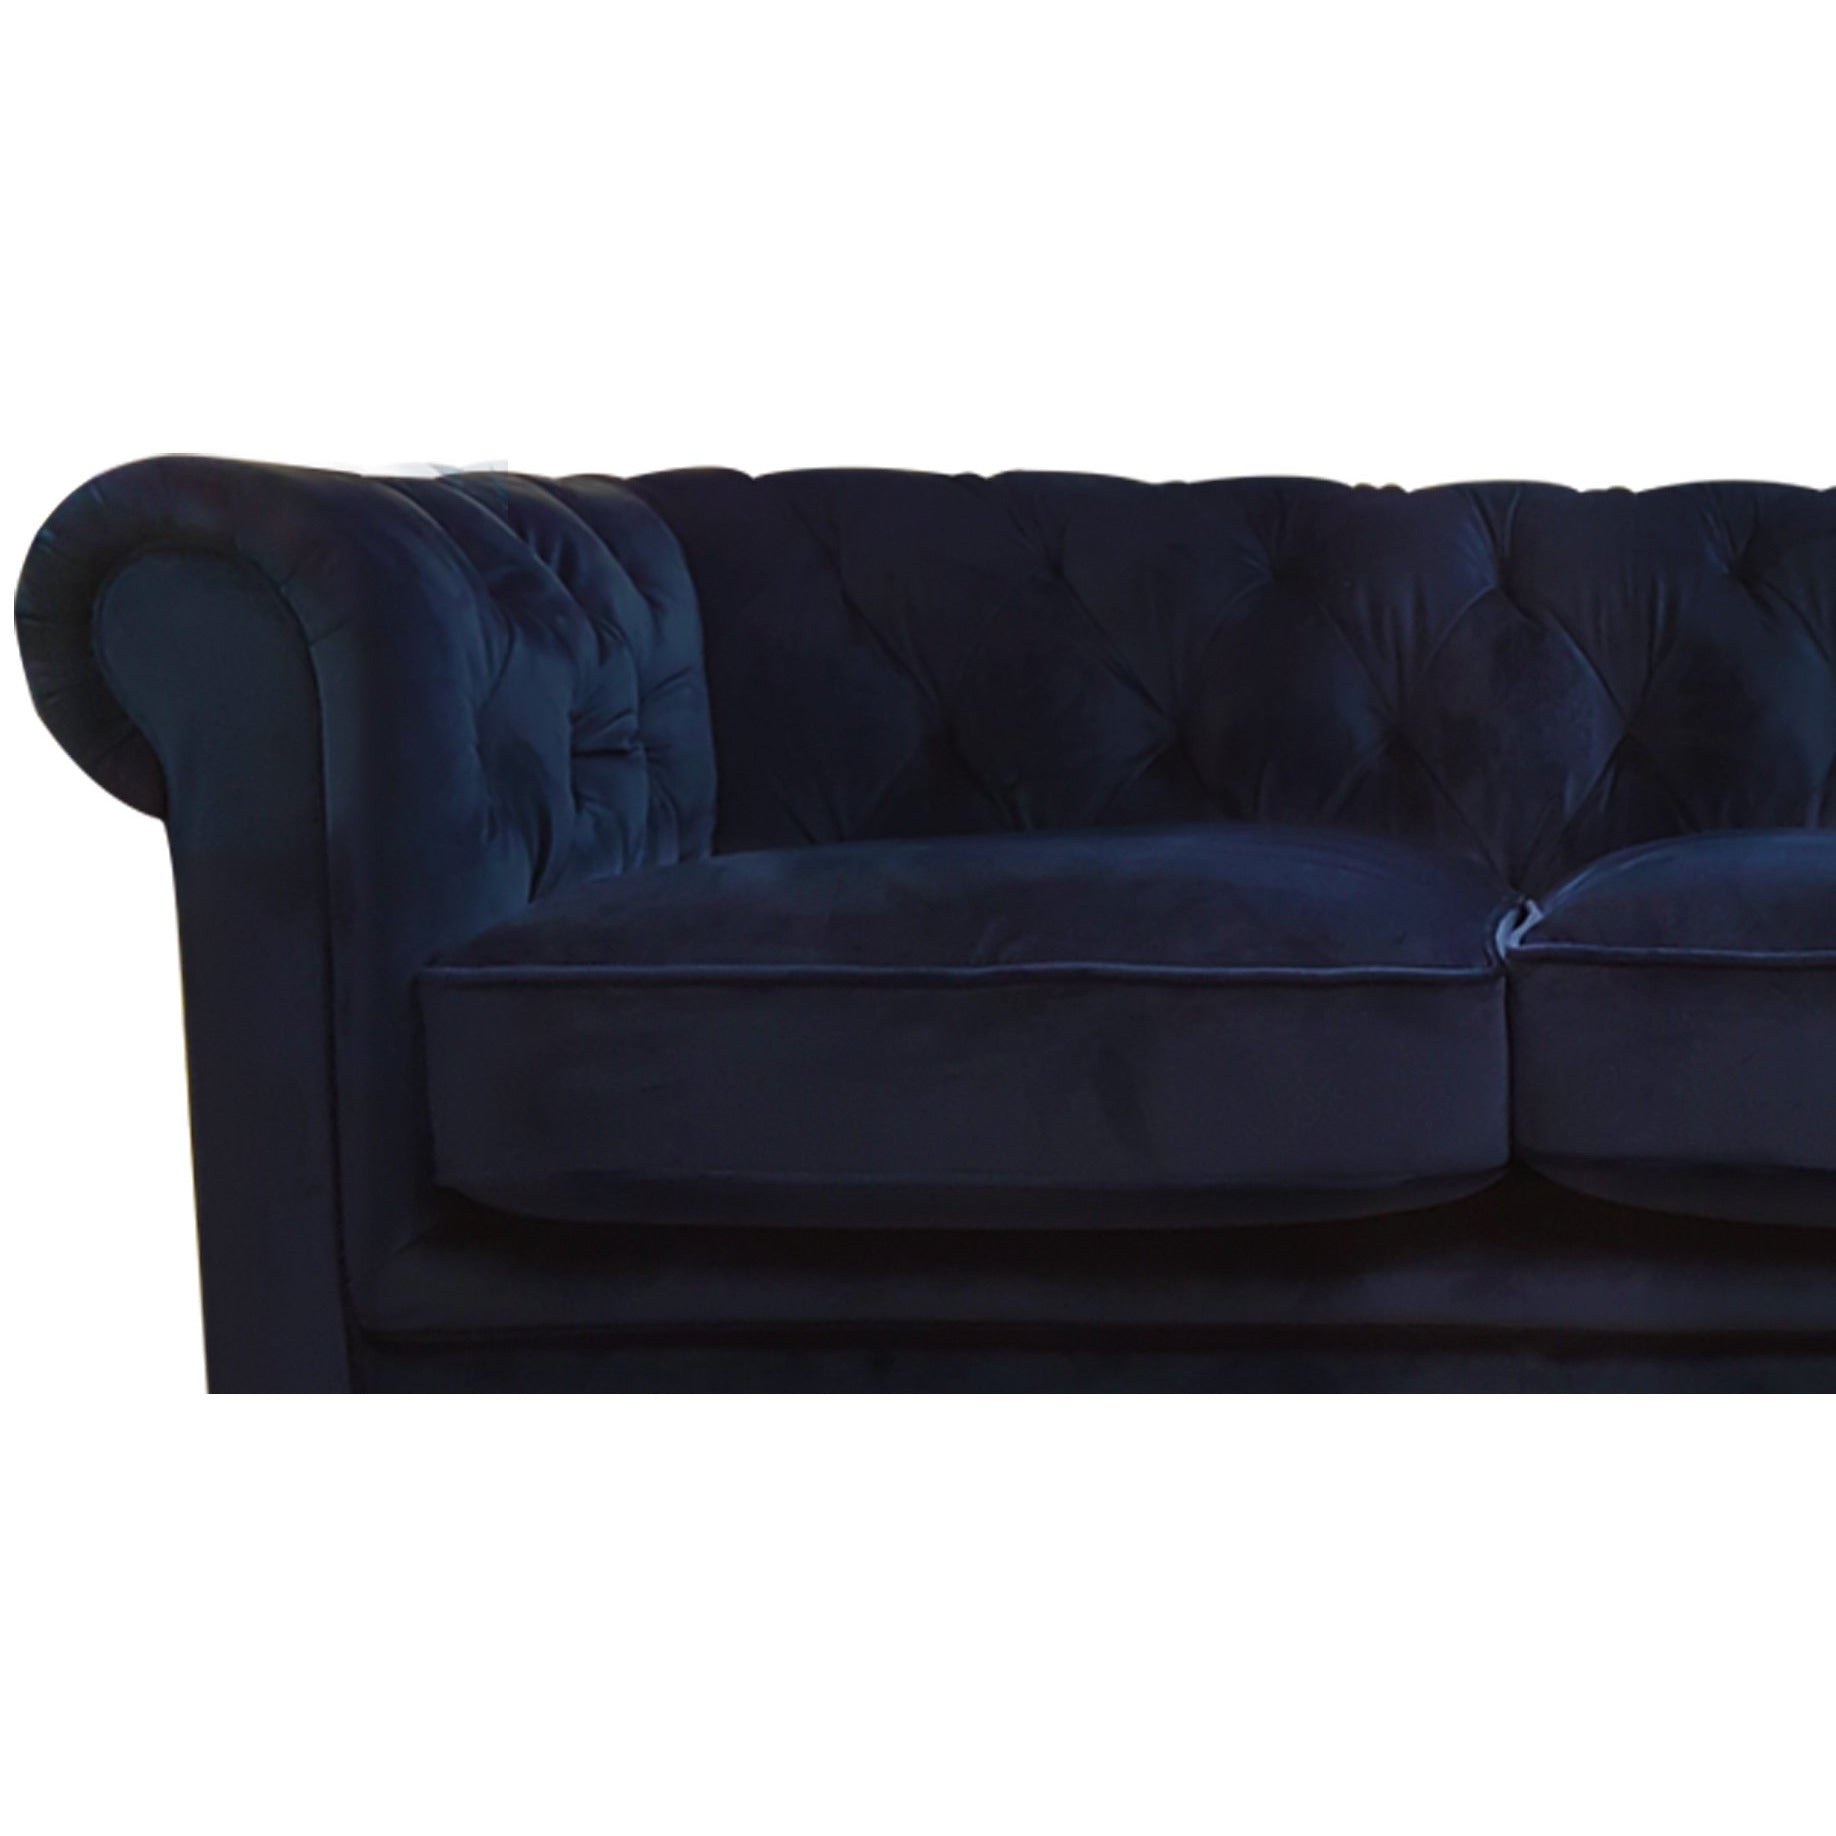 Chesterfield 3 Seater Velvet Sofa from Upstairs Downstairs Furniture in Lisburn, Monaghan and Enniskillen